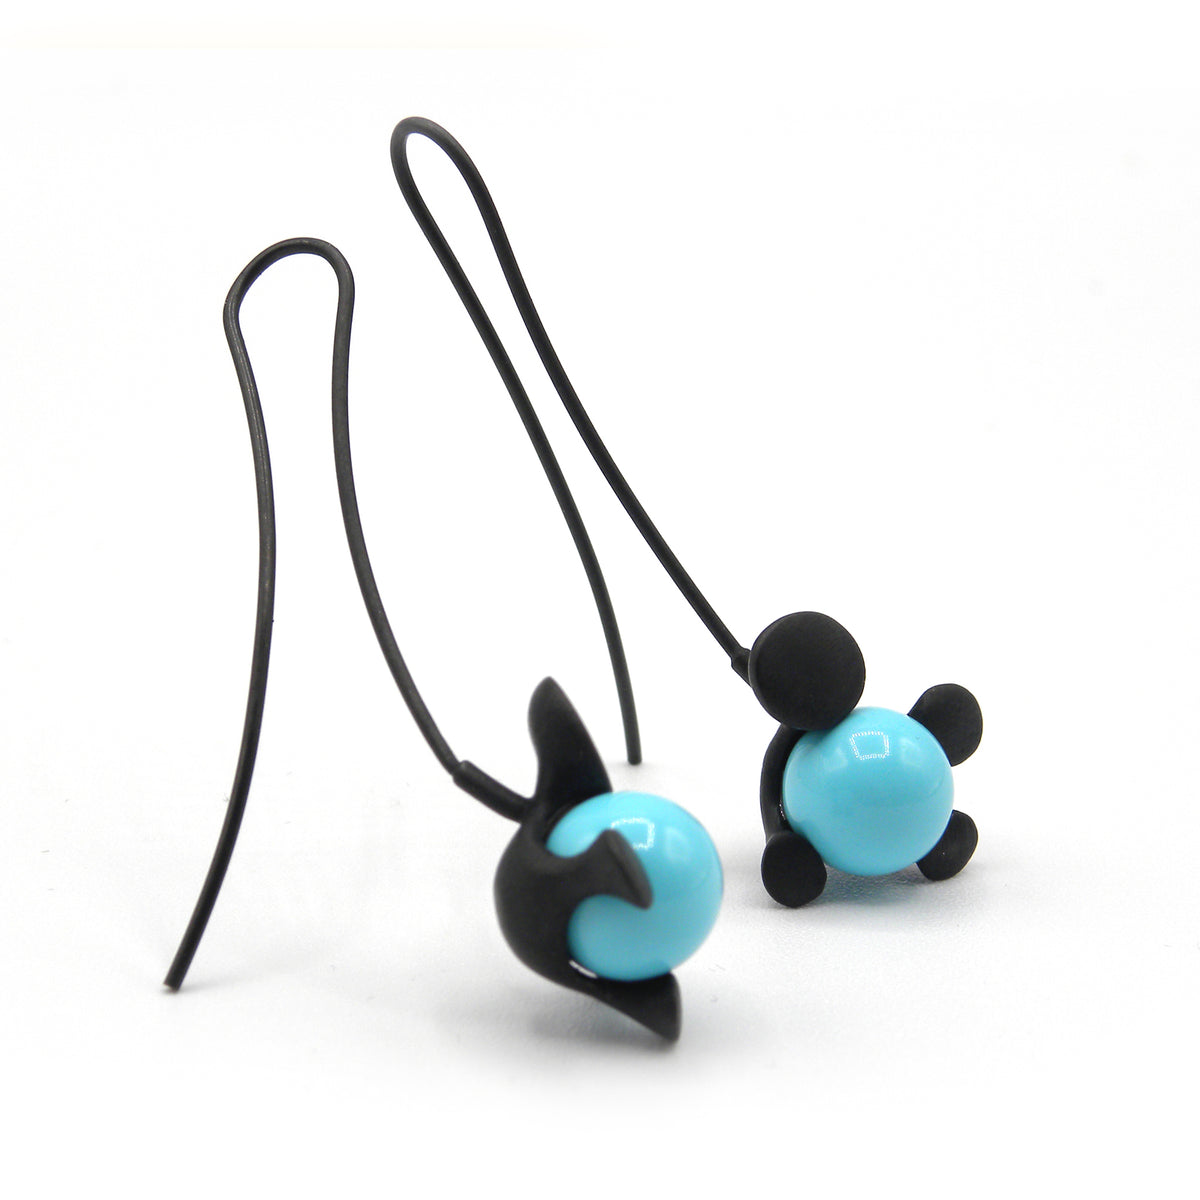 Snorky Turquoise Earrings